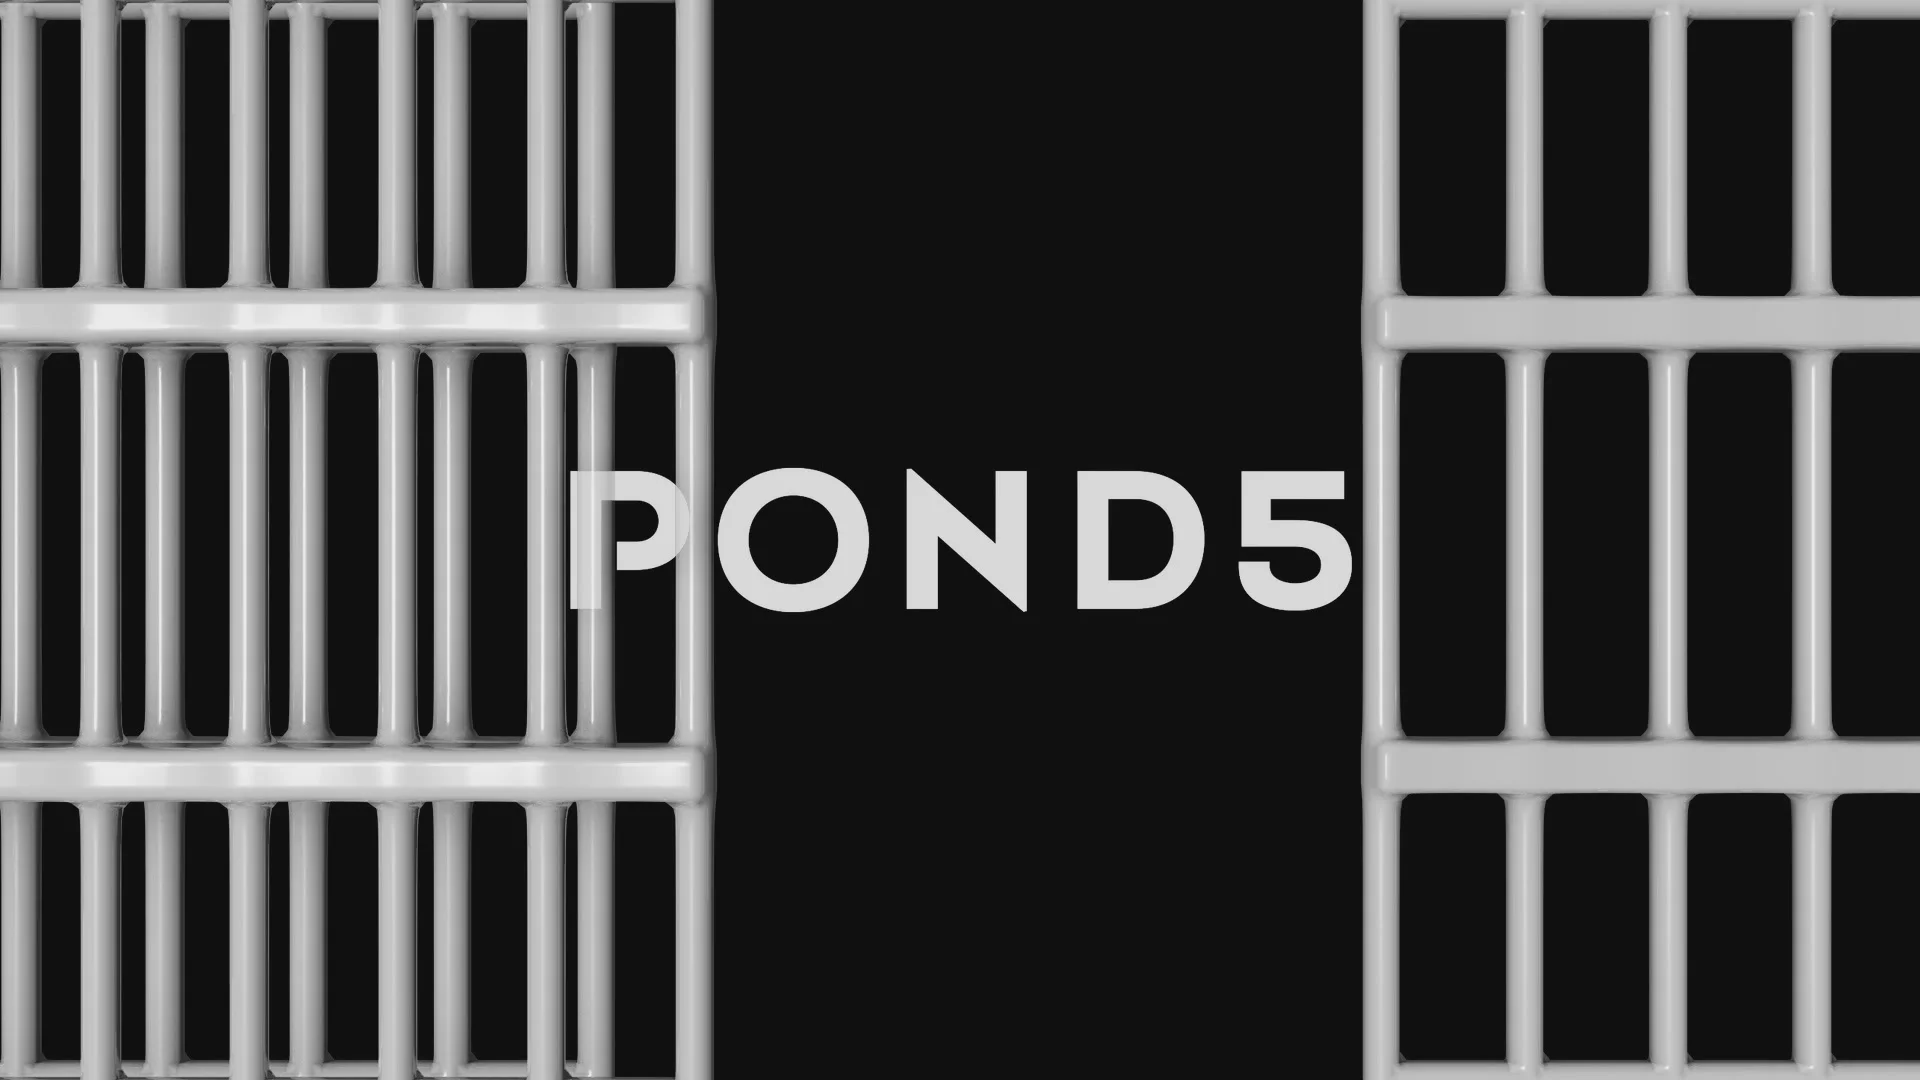 Animation of Closed Jail bars | Stock Video | Pond5